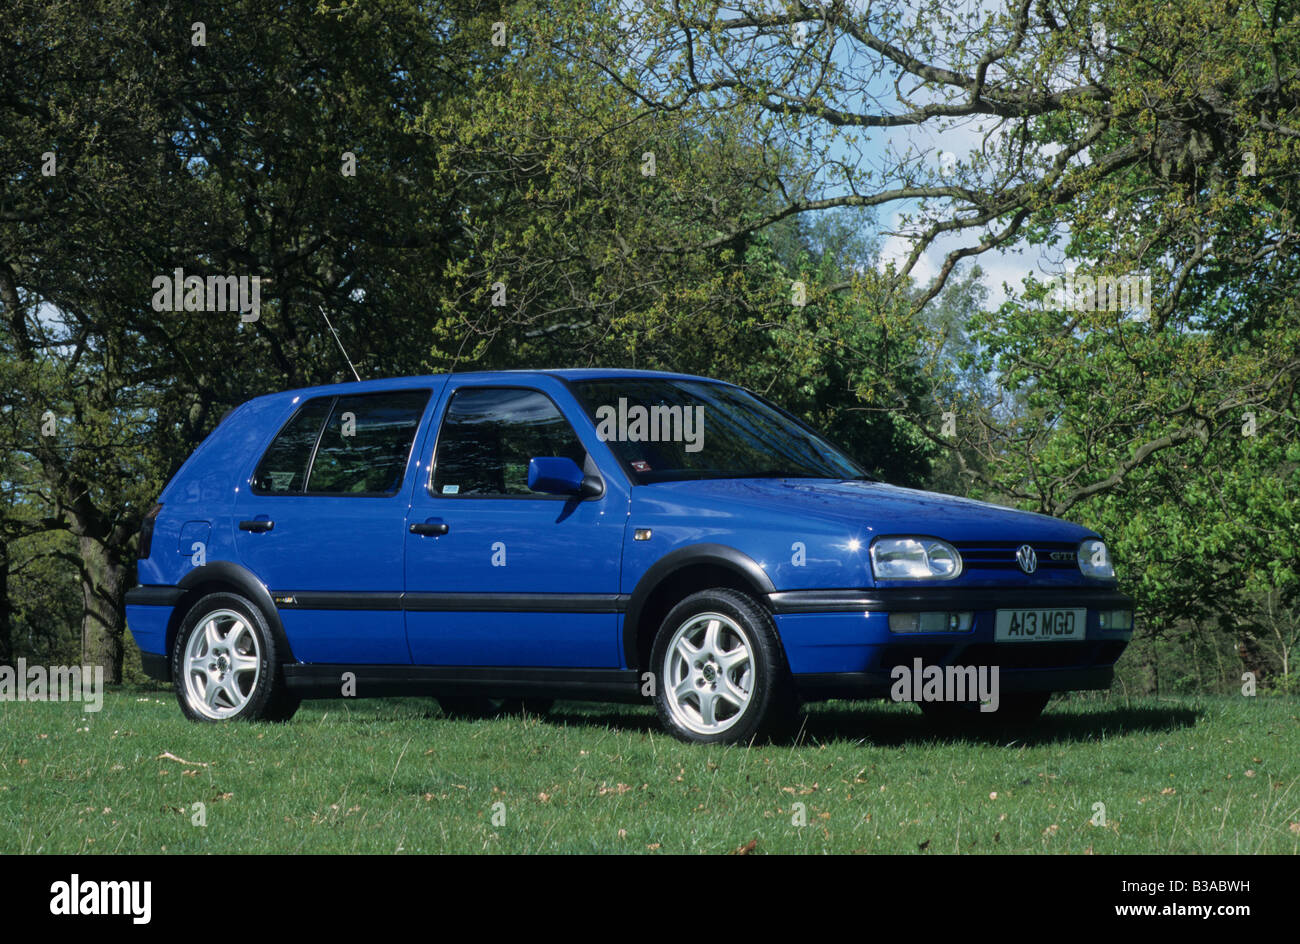 Volkswagen Golf Mk3 High Resolution Stock Photography and Images - Alamy